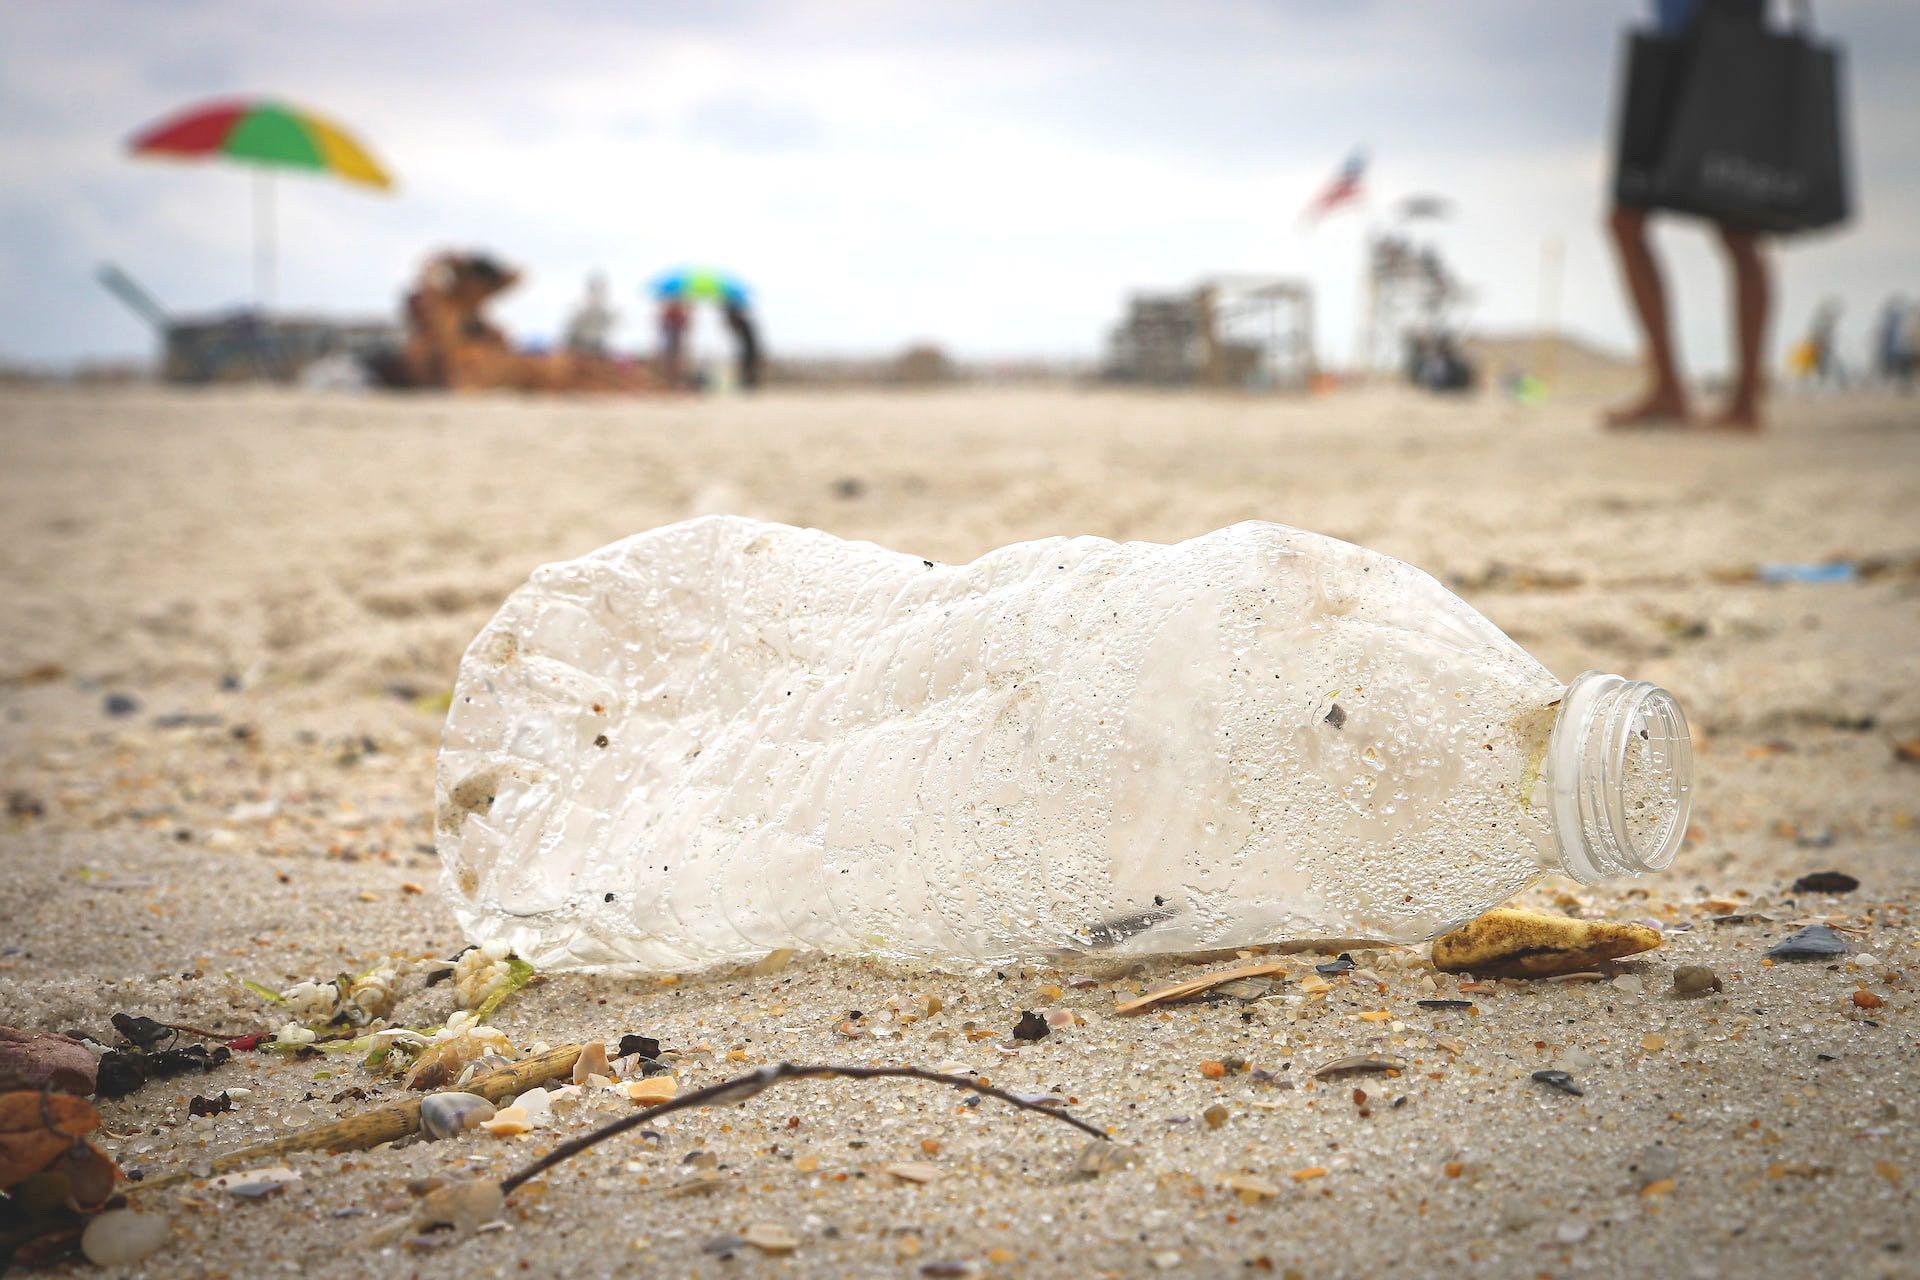 Plastic accounts for 85% of litter collected at Great Lakes beaches. (Brian Yurasits / Unsplash)